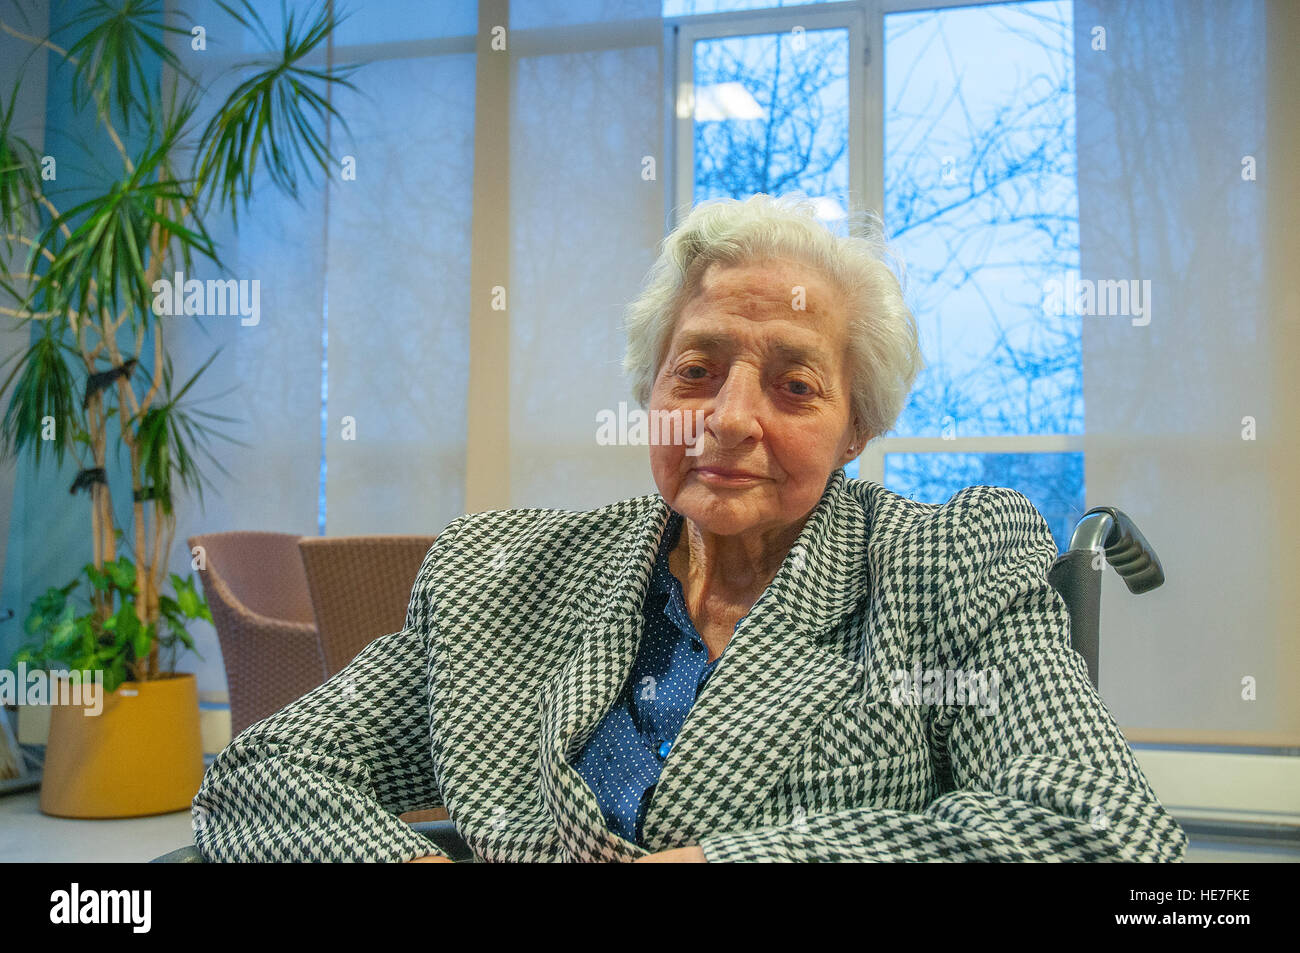 Portrait of old lady in a nursing home, looking at the camera. Stock Photo